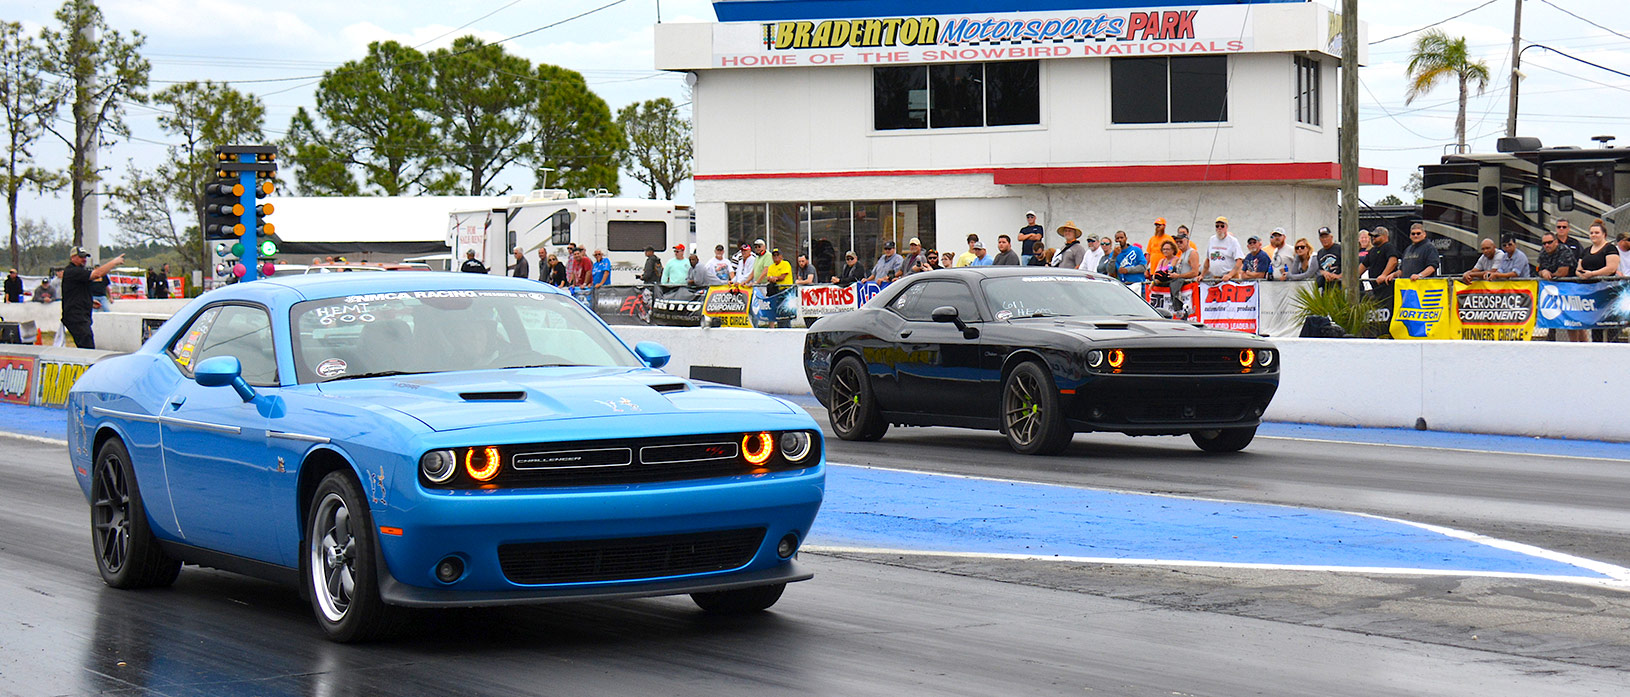 Release the Trans Brake – 2019 NMCA Season is About to Launch